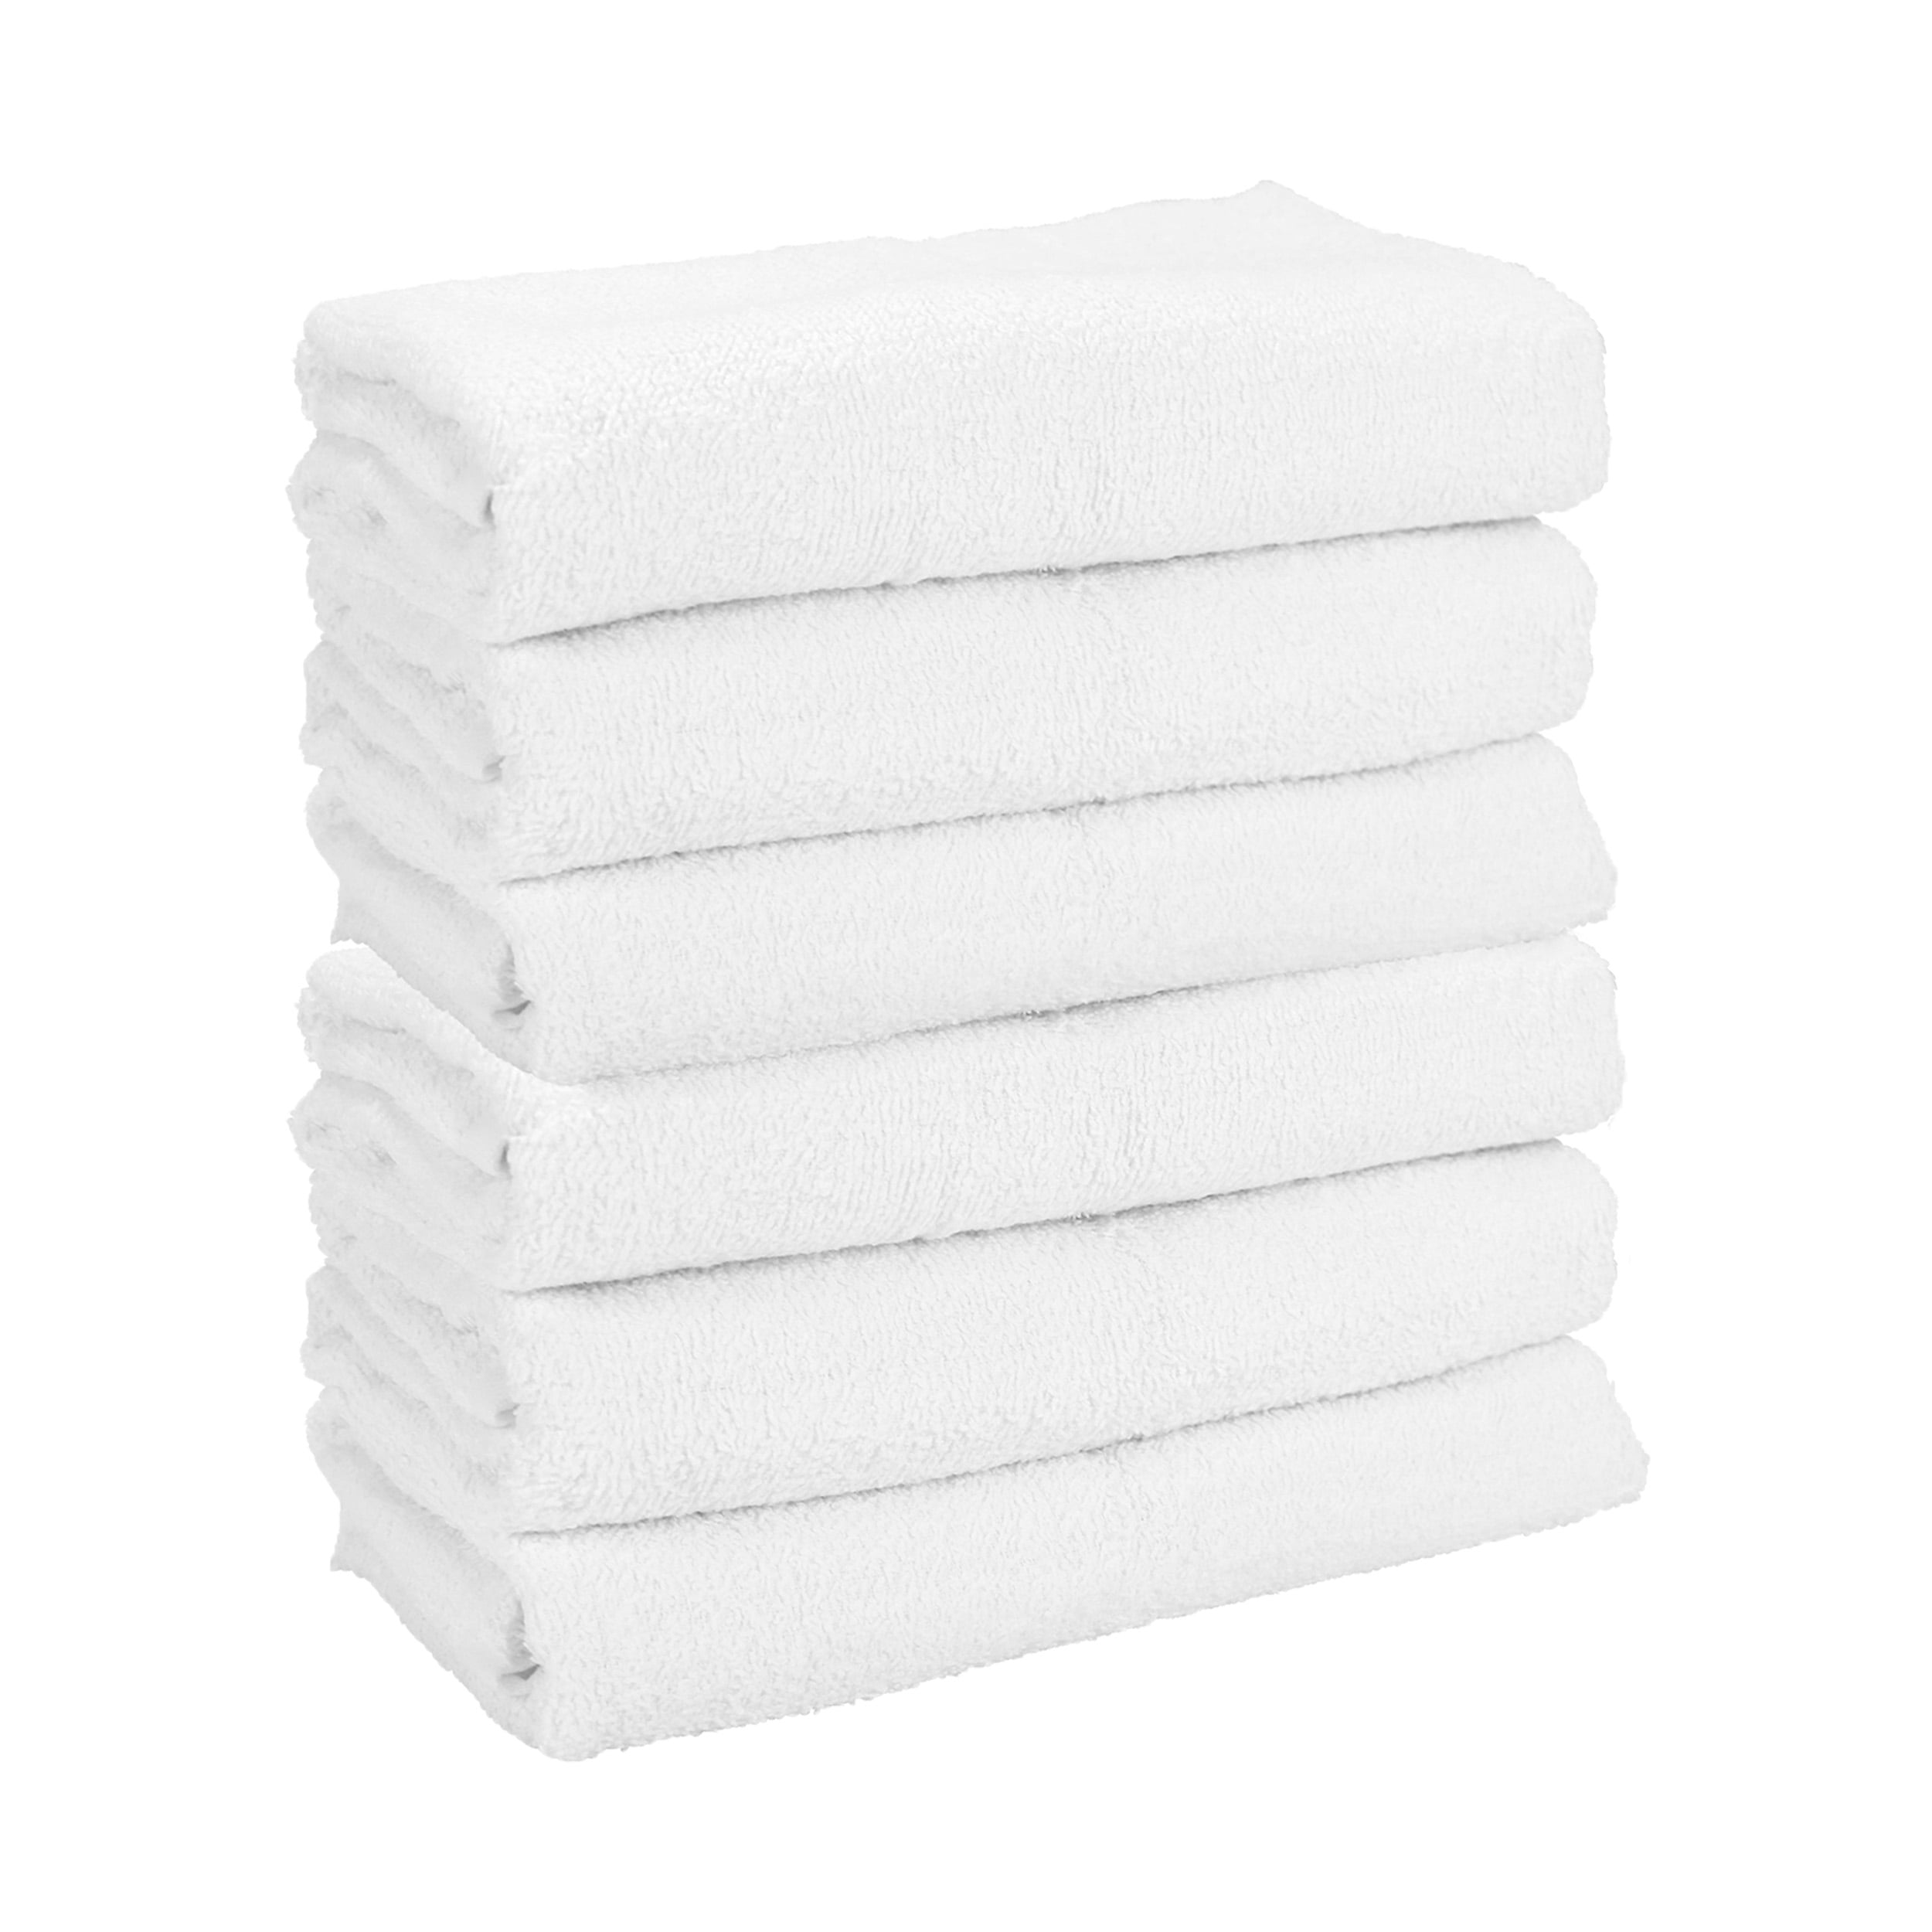 Arkwright White Hand Gym Towels - (Pack of 12) Bulk 100% Cotton Soft Quick  Dry Sweat Absorbent Hotel Quality Towels for Workout, Bathroom, Spa, Pool